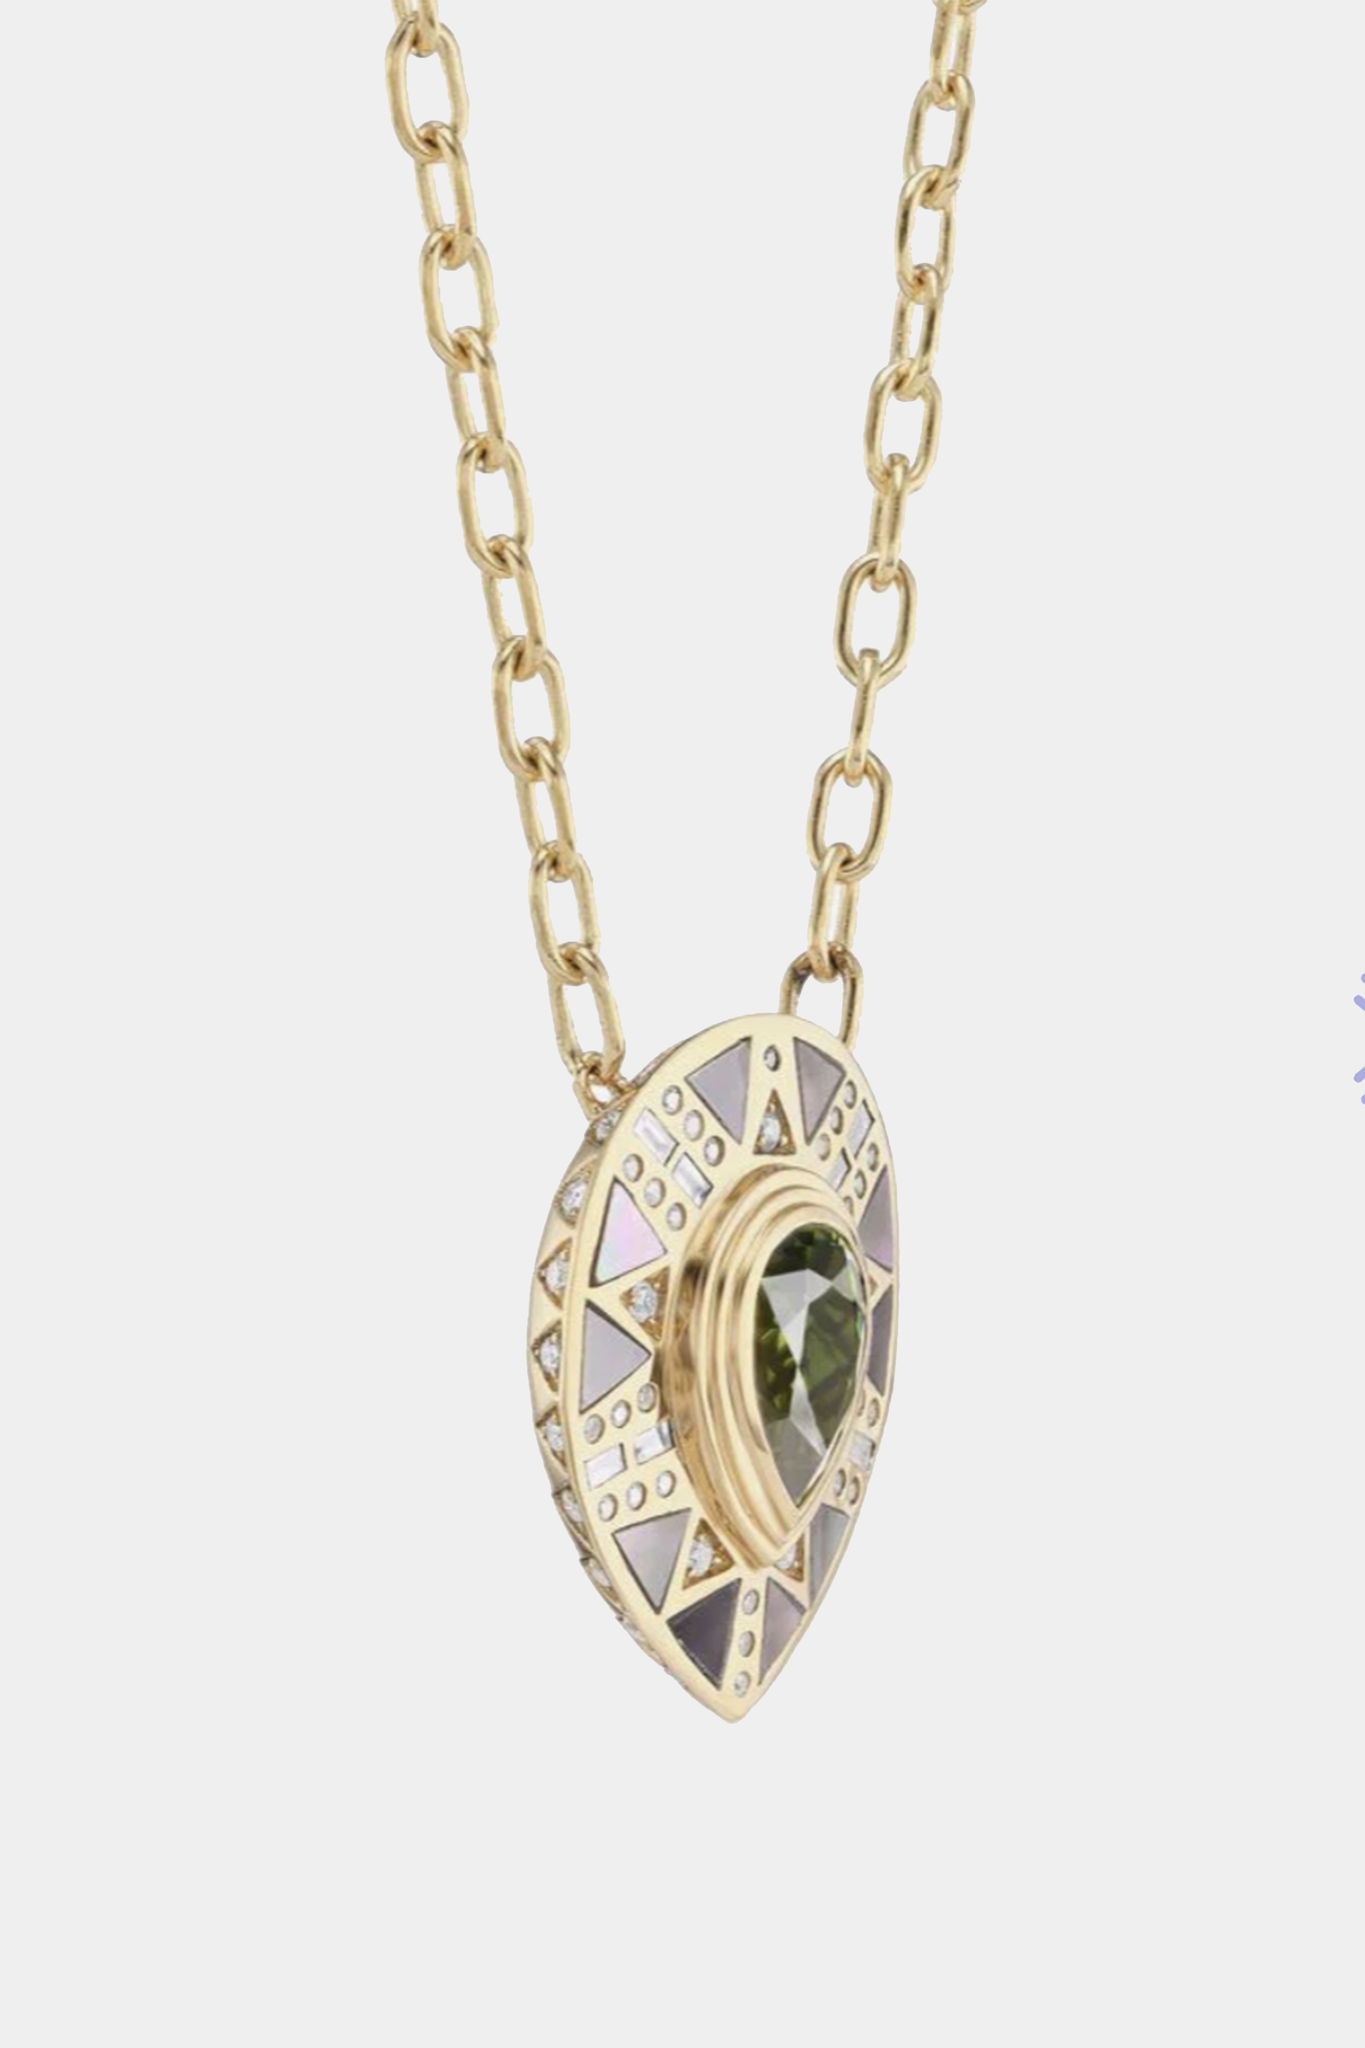 HARWELL GODFREY - cleopatra's tear pendant necklace, dark mother of pearl and tourmaline